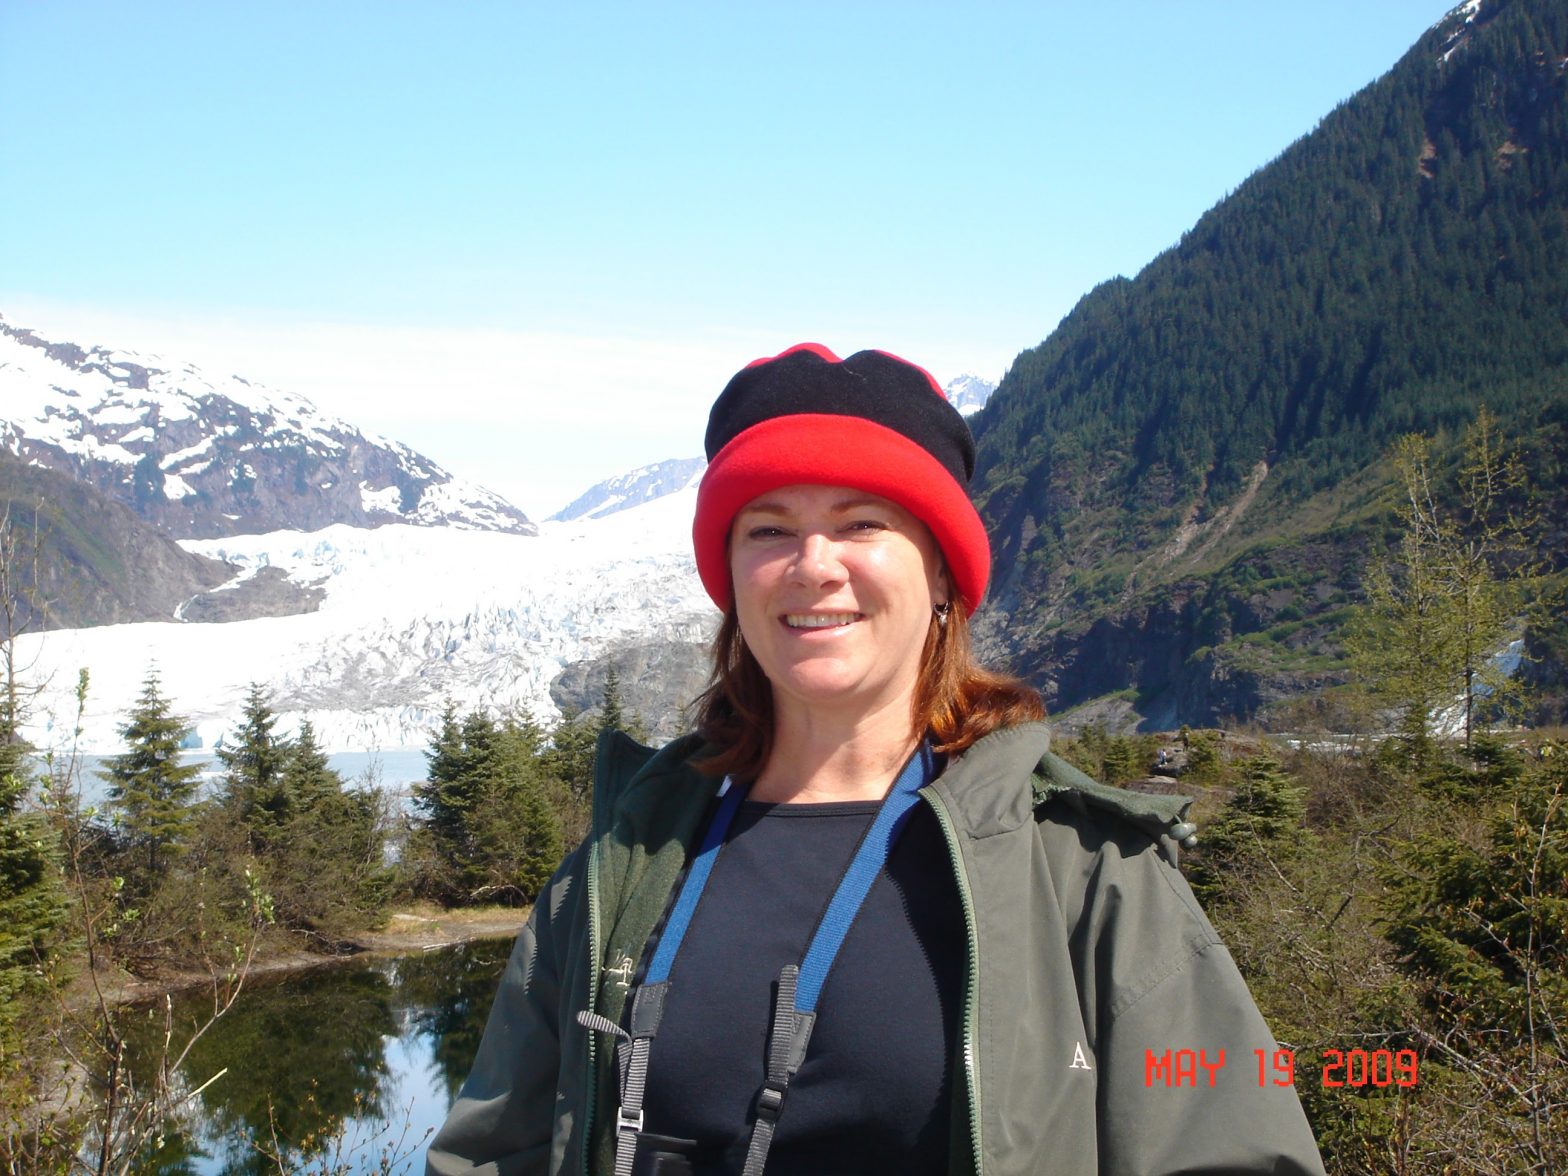 Angie At Mendenhall Glacier Scaled